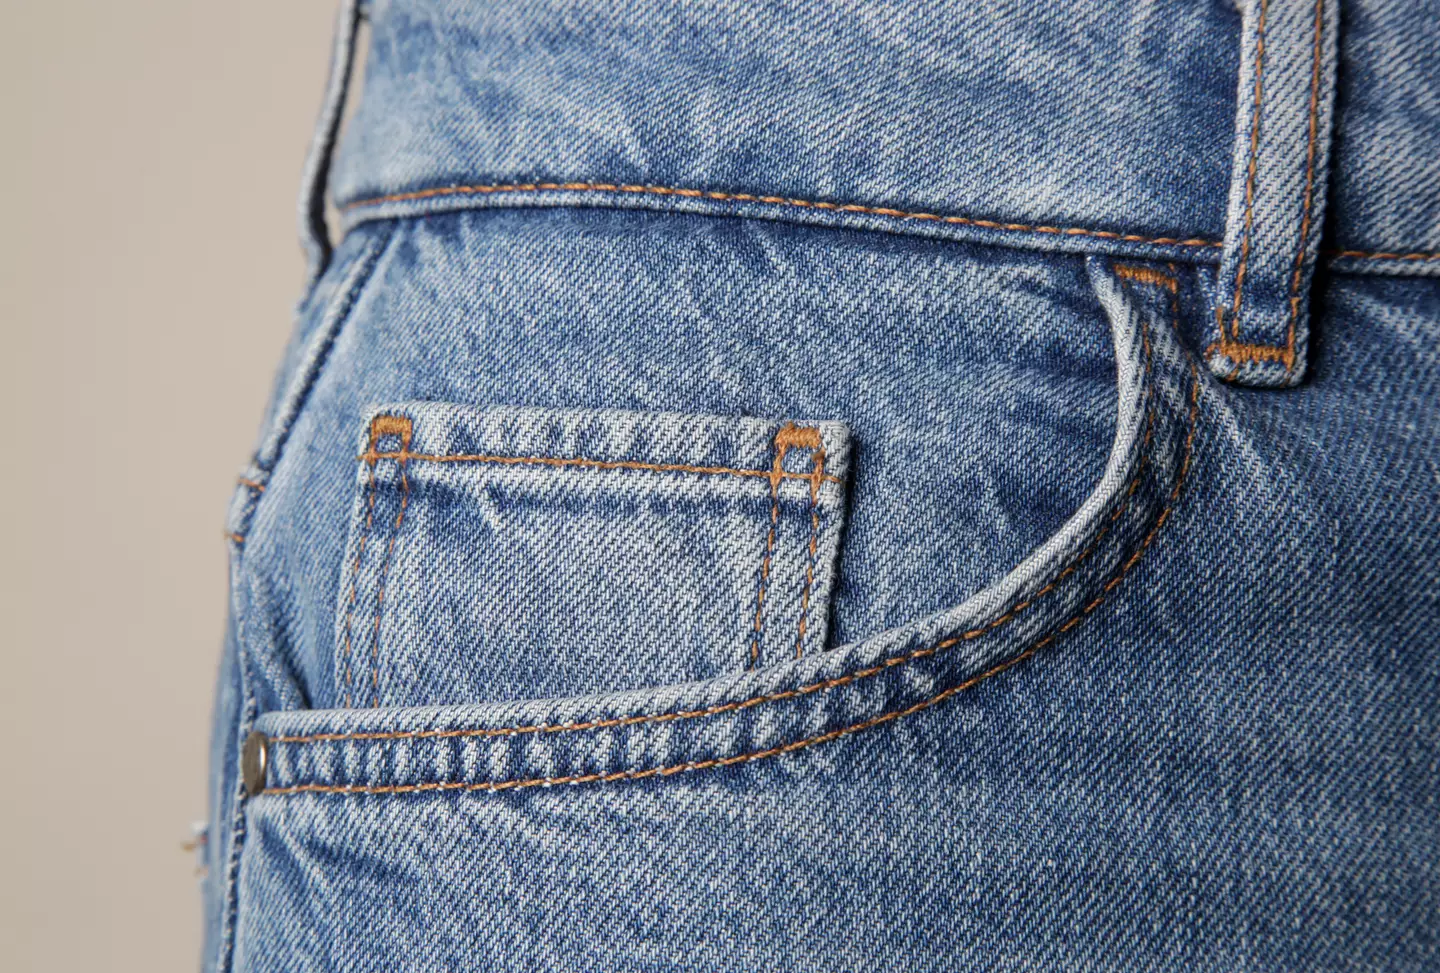 The small pocket actually dates back to 1890, and were stitched into Levi's 'waist overall' jeans with a specific purpose in mind. (Getty Stock Image)